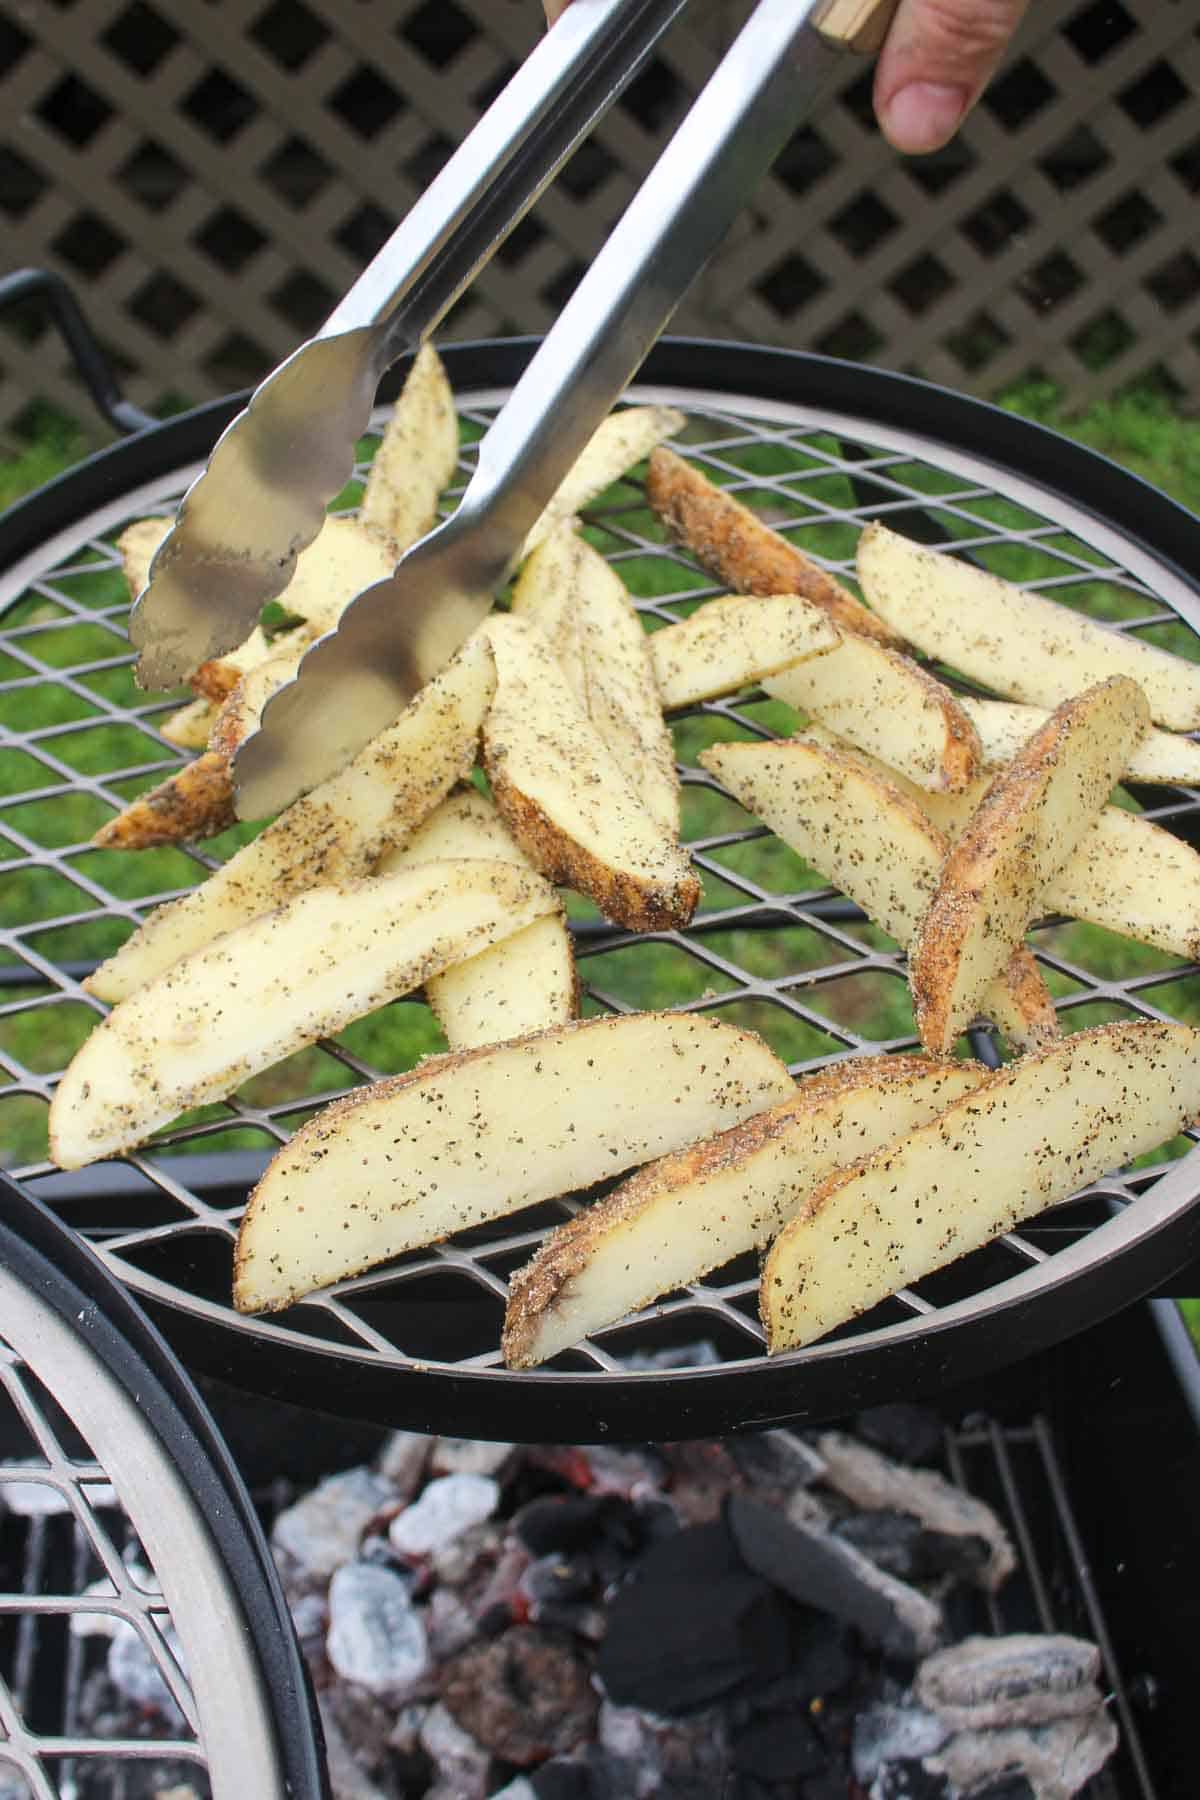 Spacing the potato wedges out evenly on the grill grate.